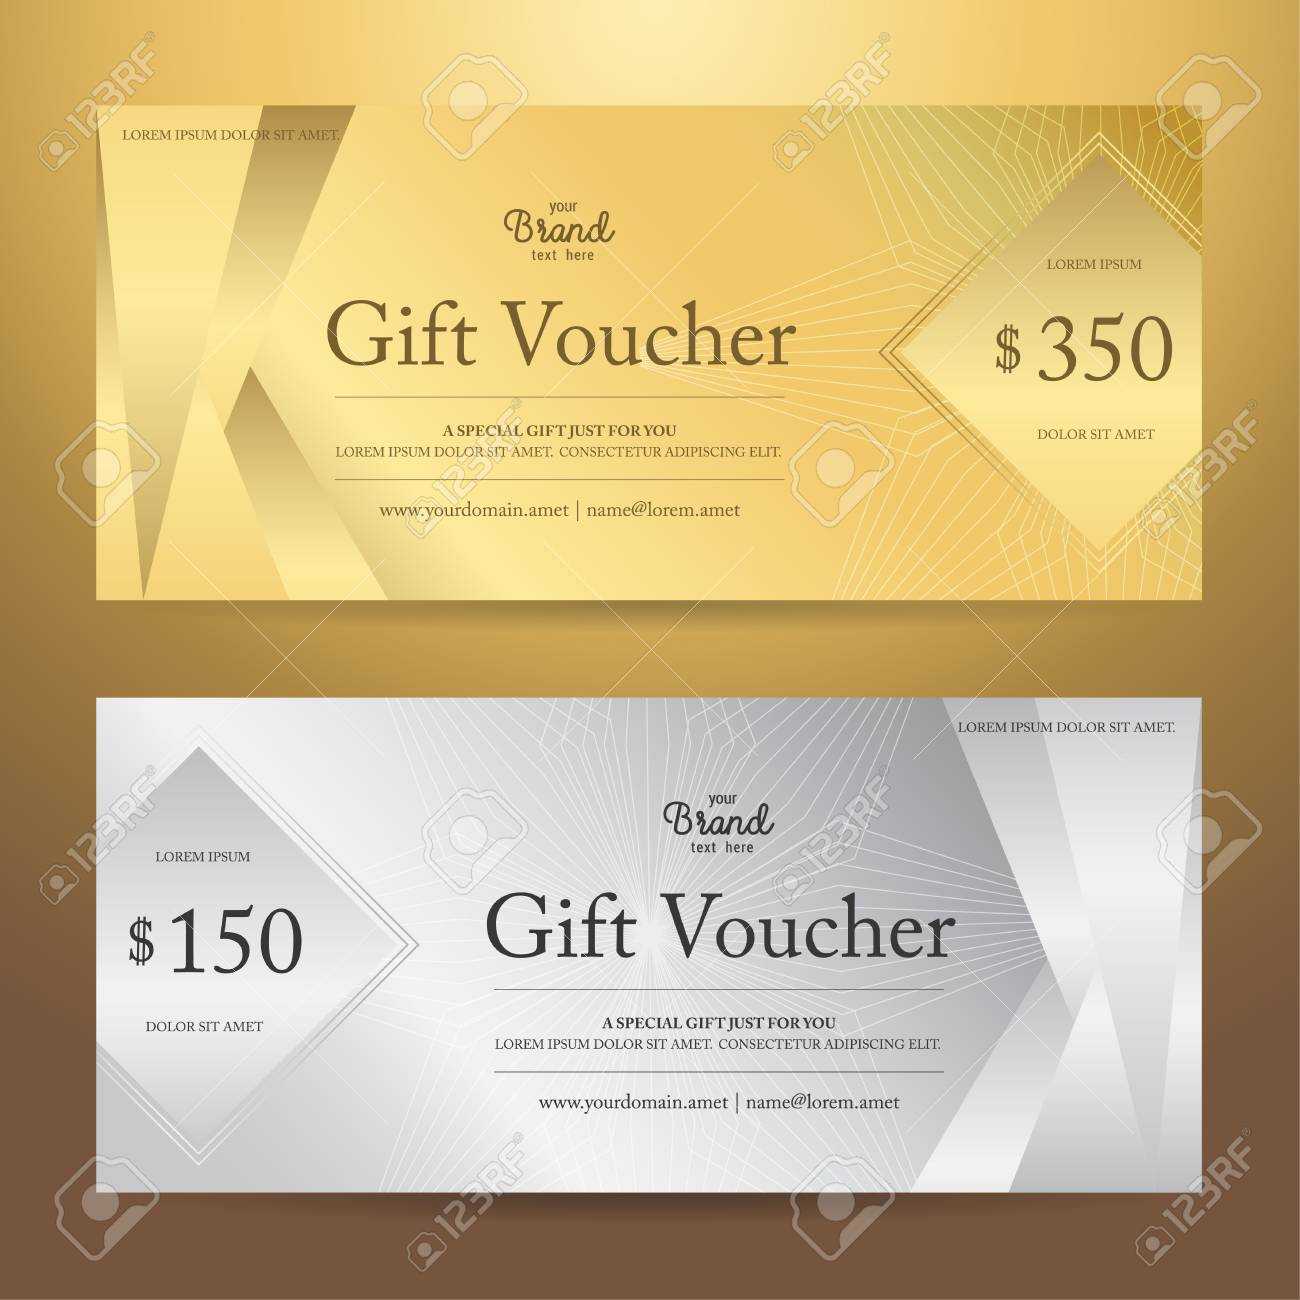 Elegant Gift Voucher Or Gift Card Or Coupon Template For Discount.. Within Elegant Gift Certificate Template